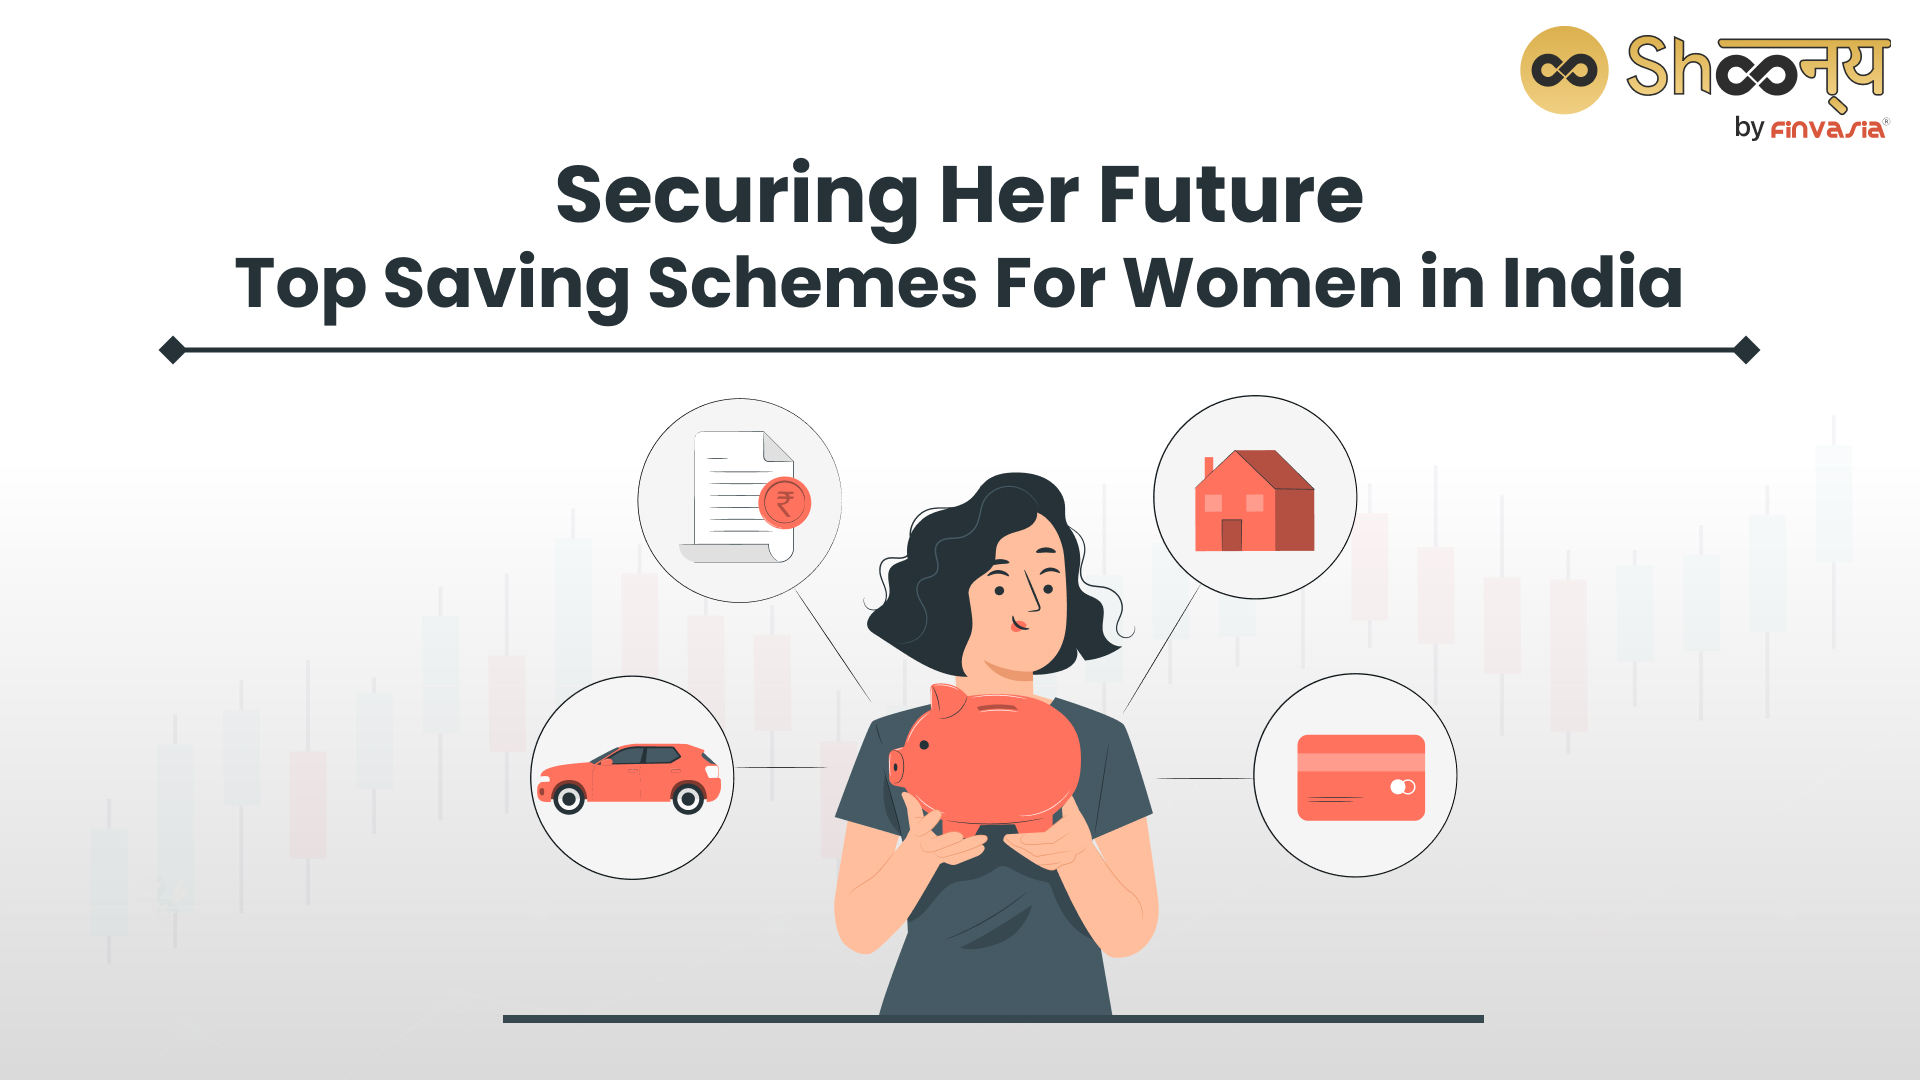 Which are the Top Saving Schemes for Women in India?